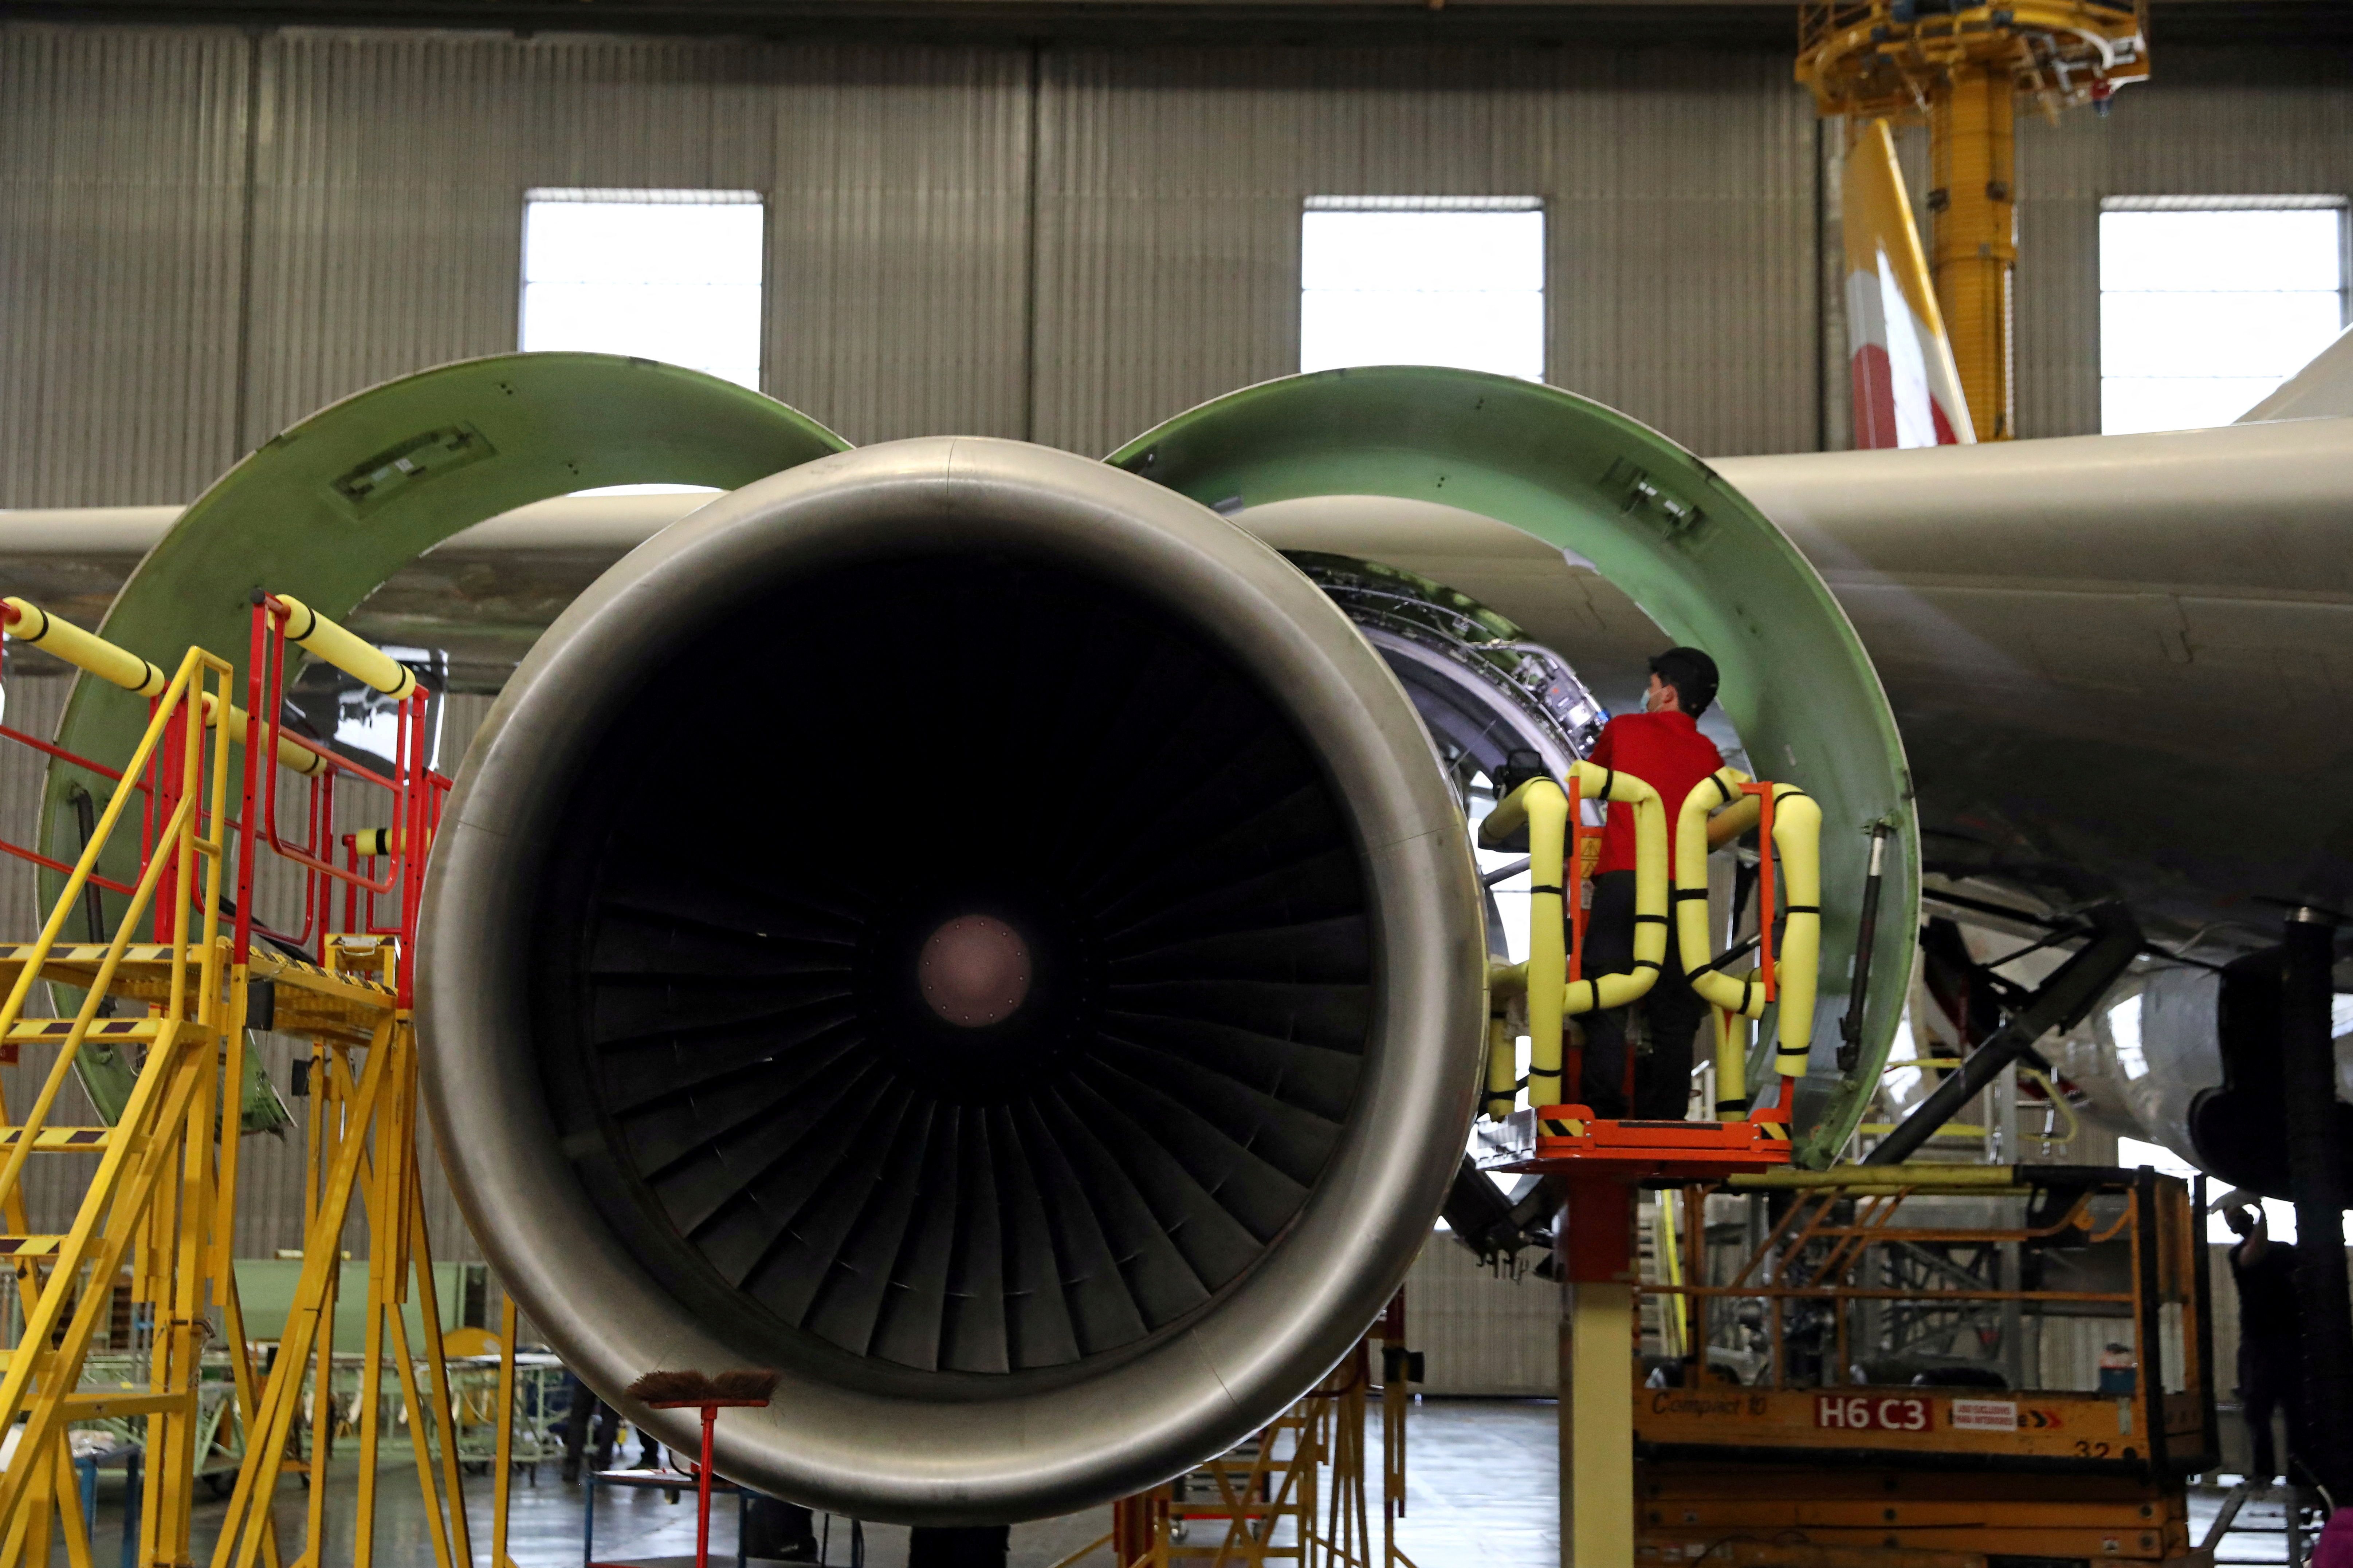 An IAG Iberia's worker inspects an engine after transforming an Airbus 330 passenger aircraft into a cargo one in Madrid